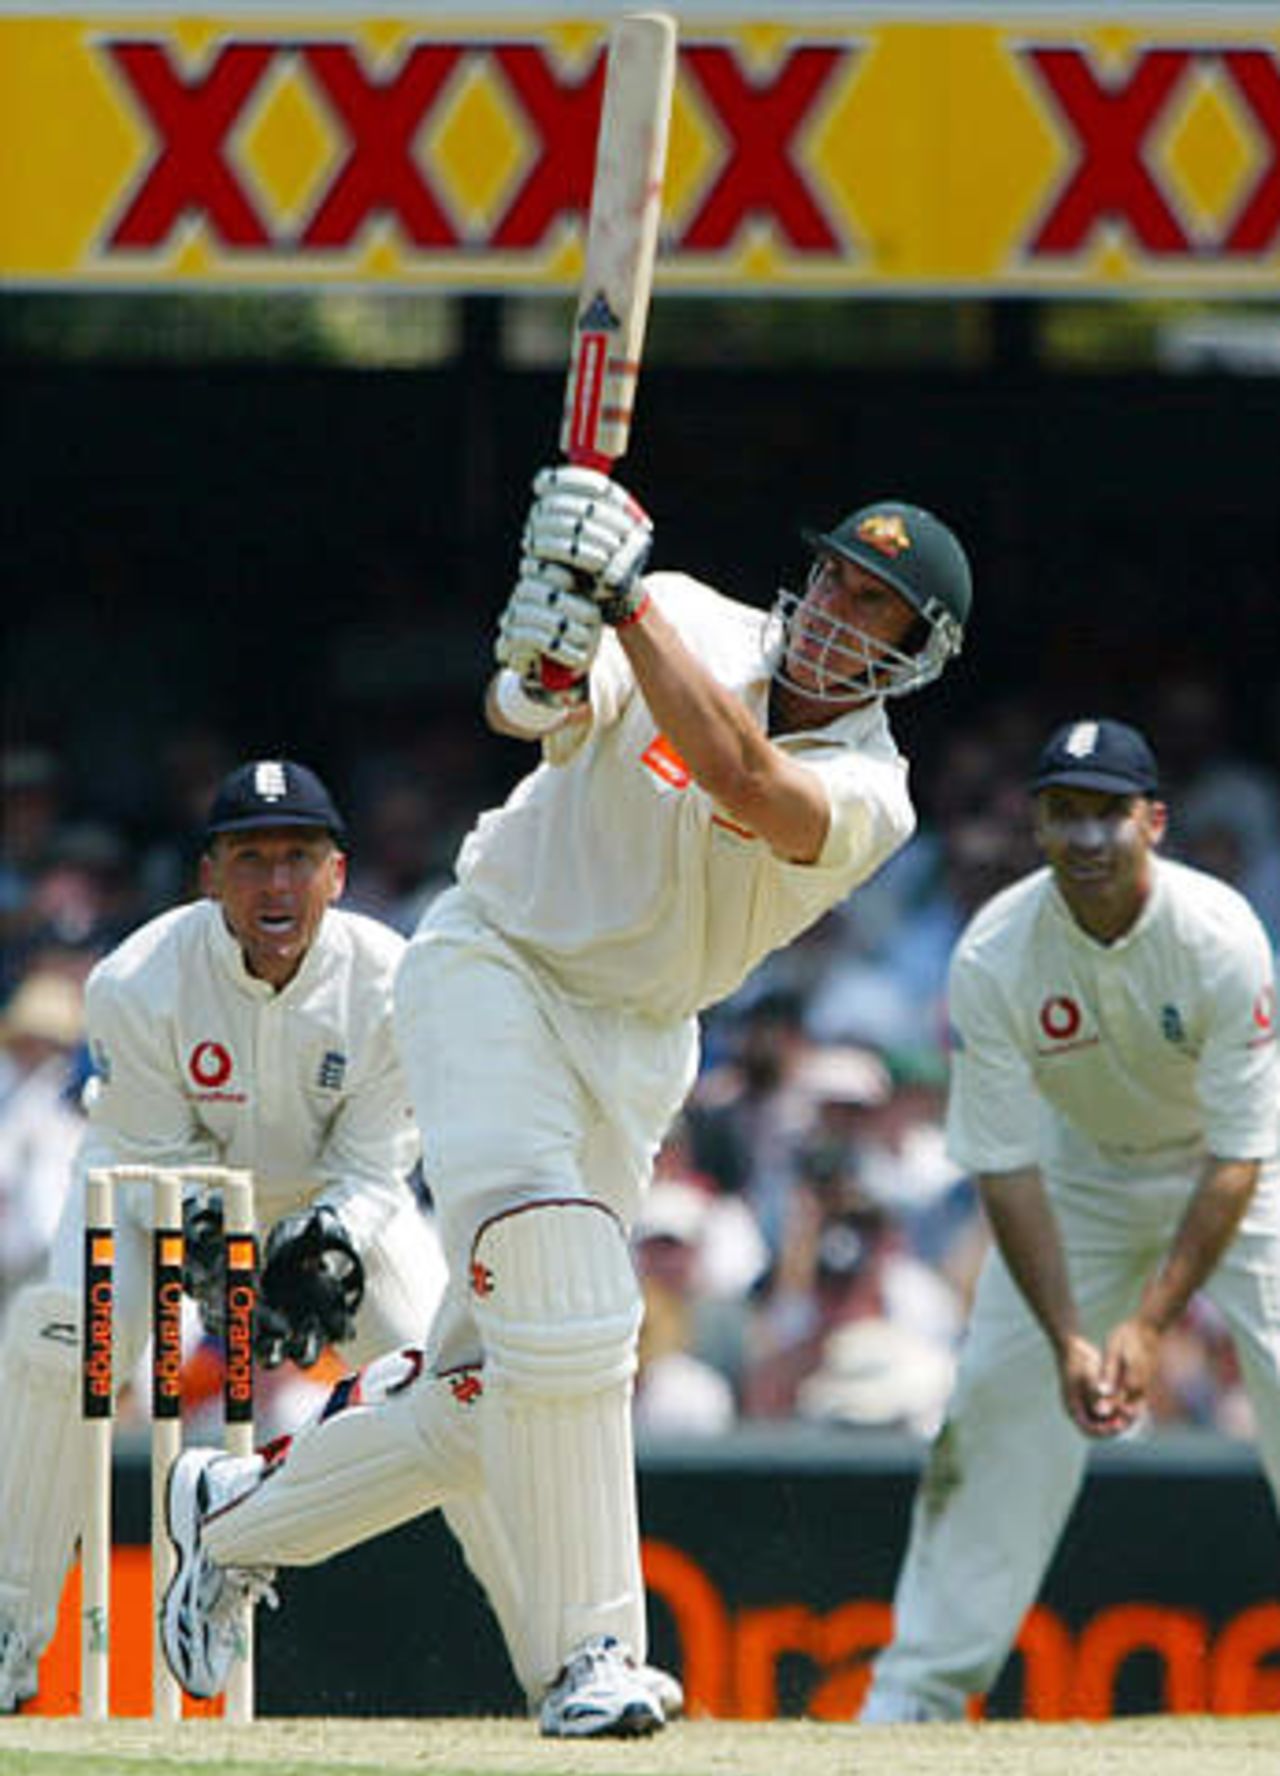 Australia's Matthew Hayden (C) hits a four during his century innings as England's captain Nasser Hussain (R) and wicket-keeper Alec Stewart look on during the first day's play in the first Ashes test match at the Gabba in Brisbane November 7, 2002.